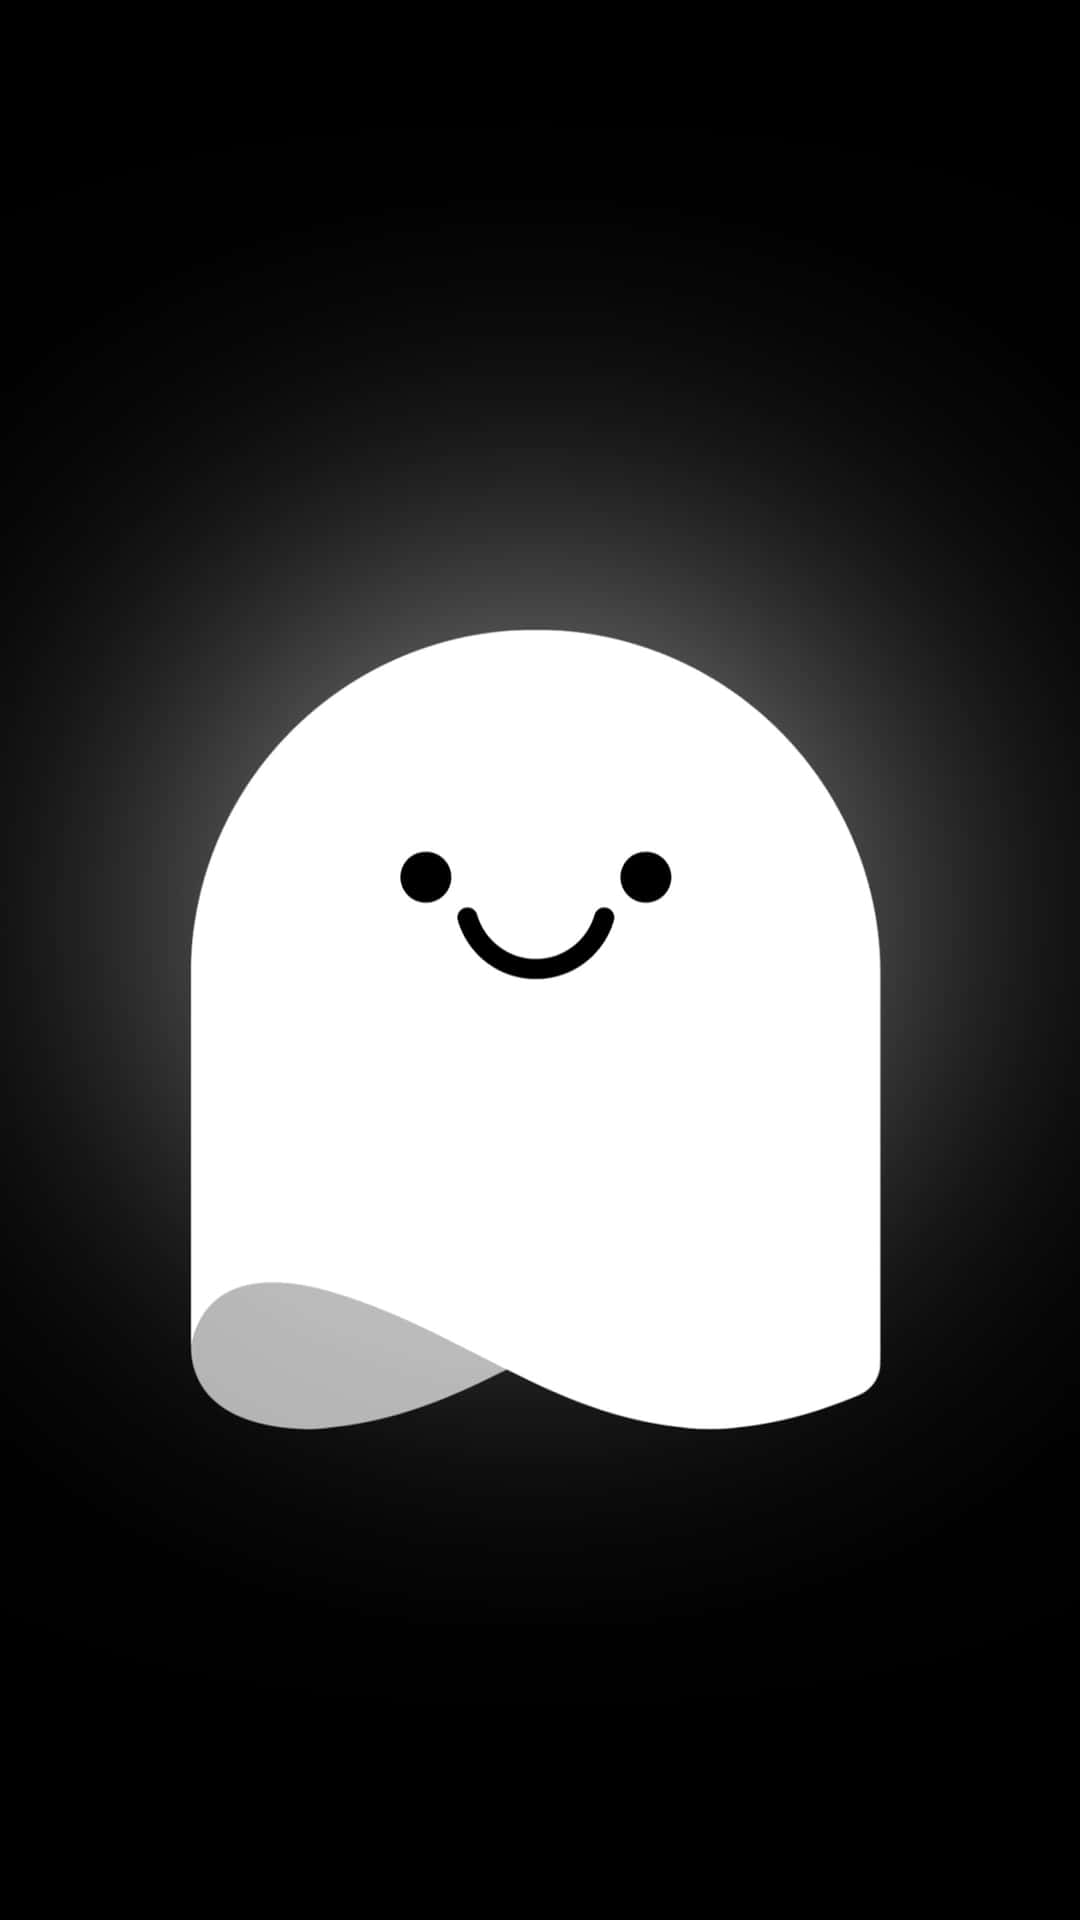 Smiling Ghost Graphicon Black Background Wallpaper